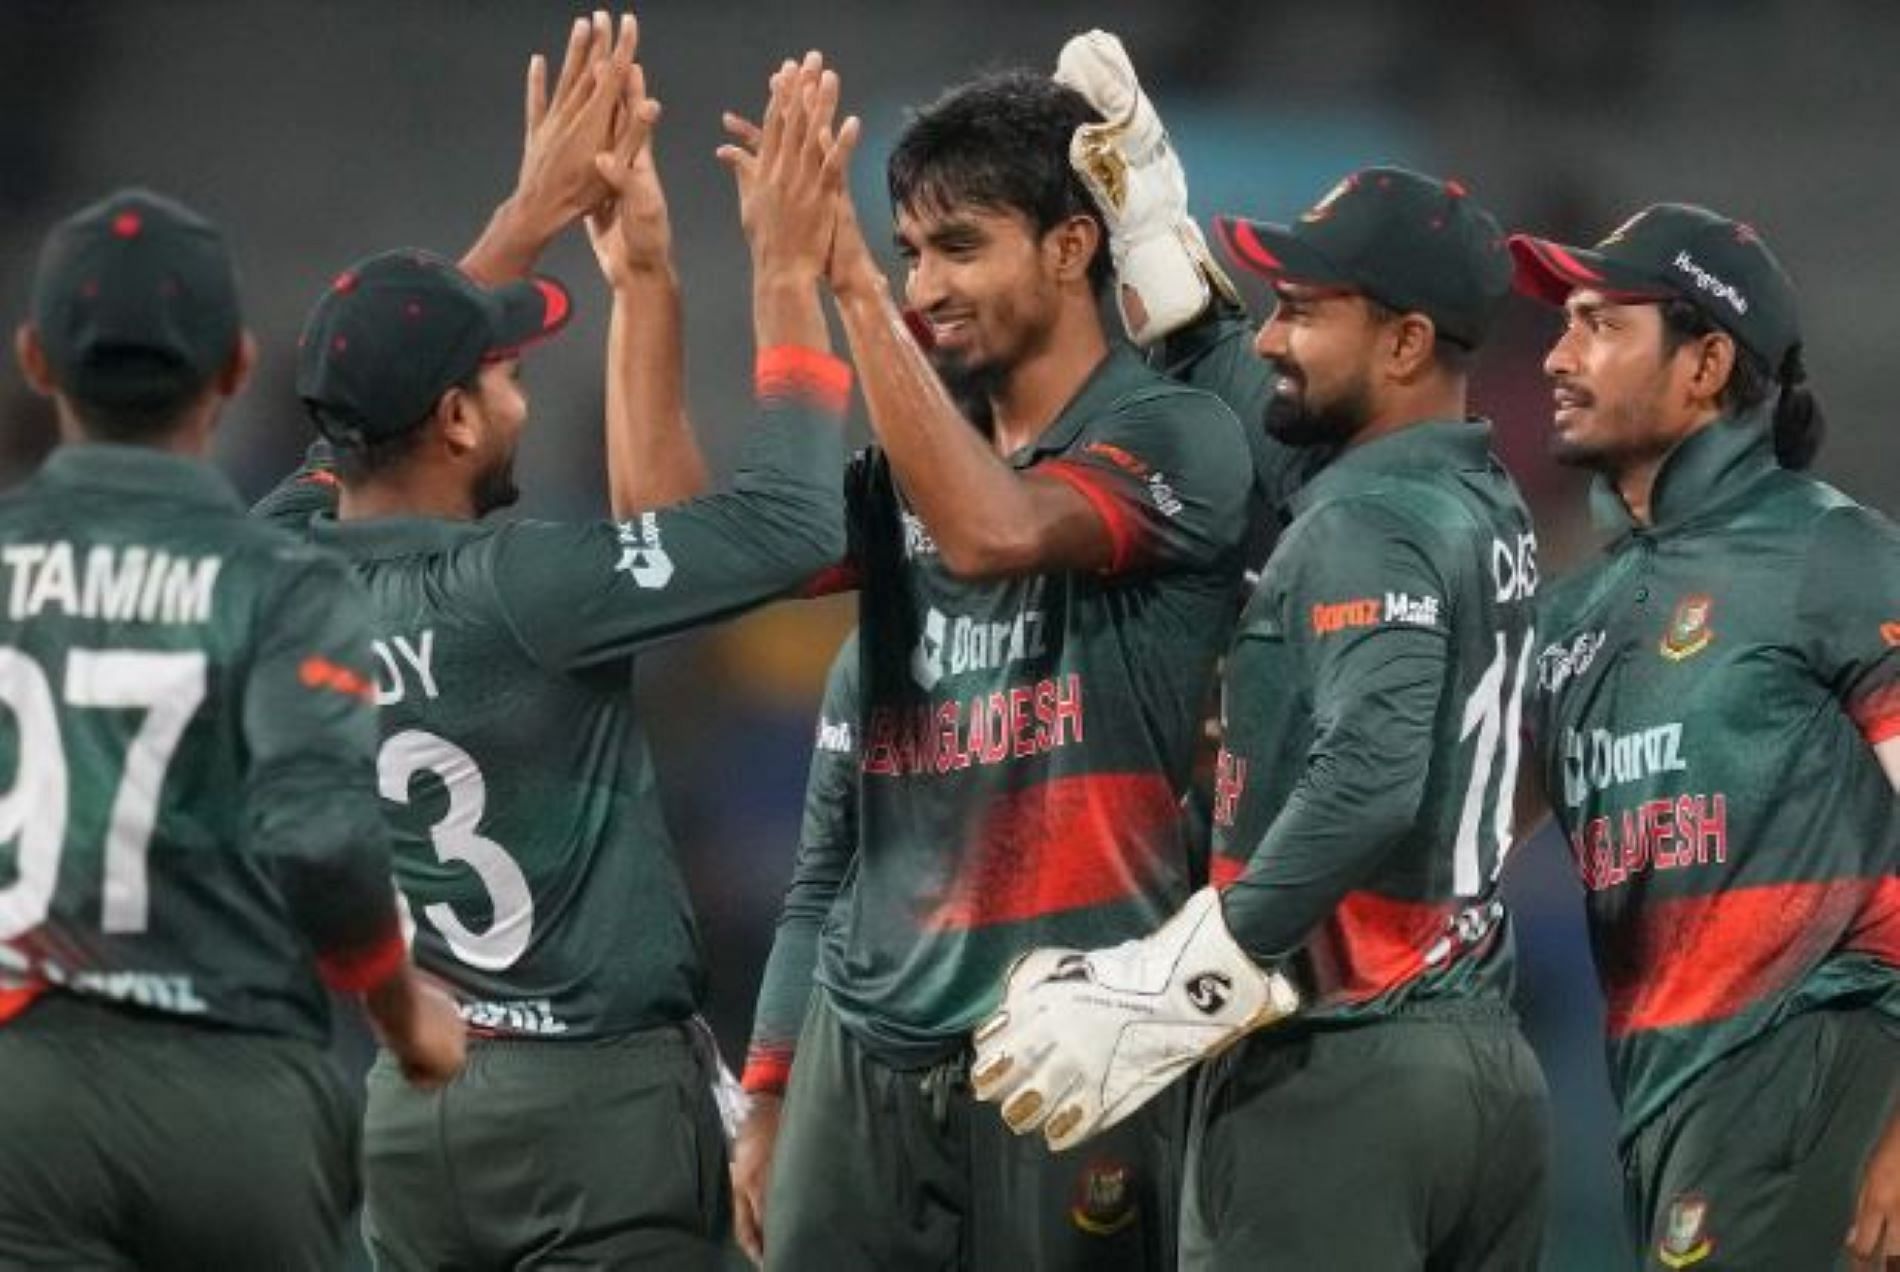 Bangladesh has been disappointing after a promising start in the World Cup.